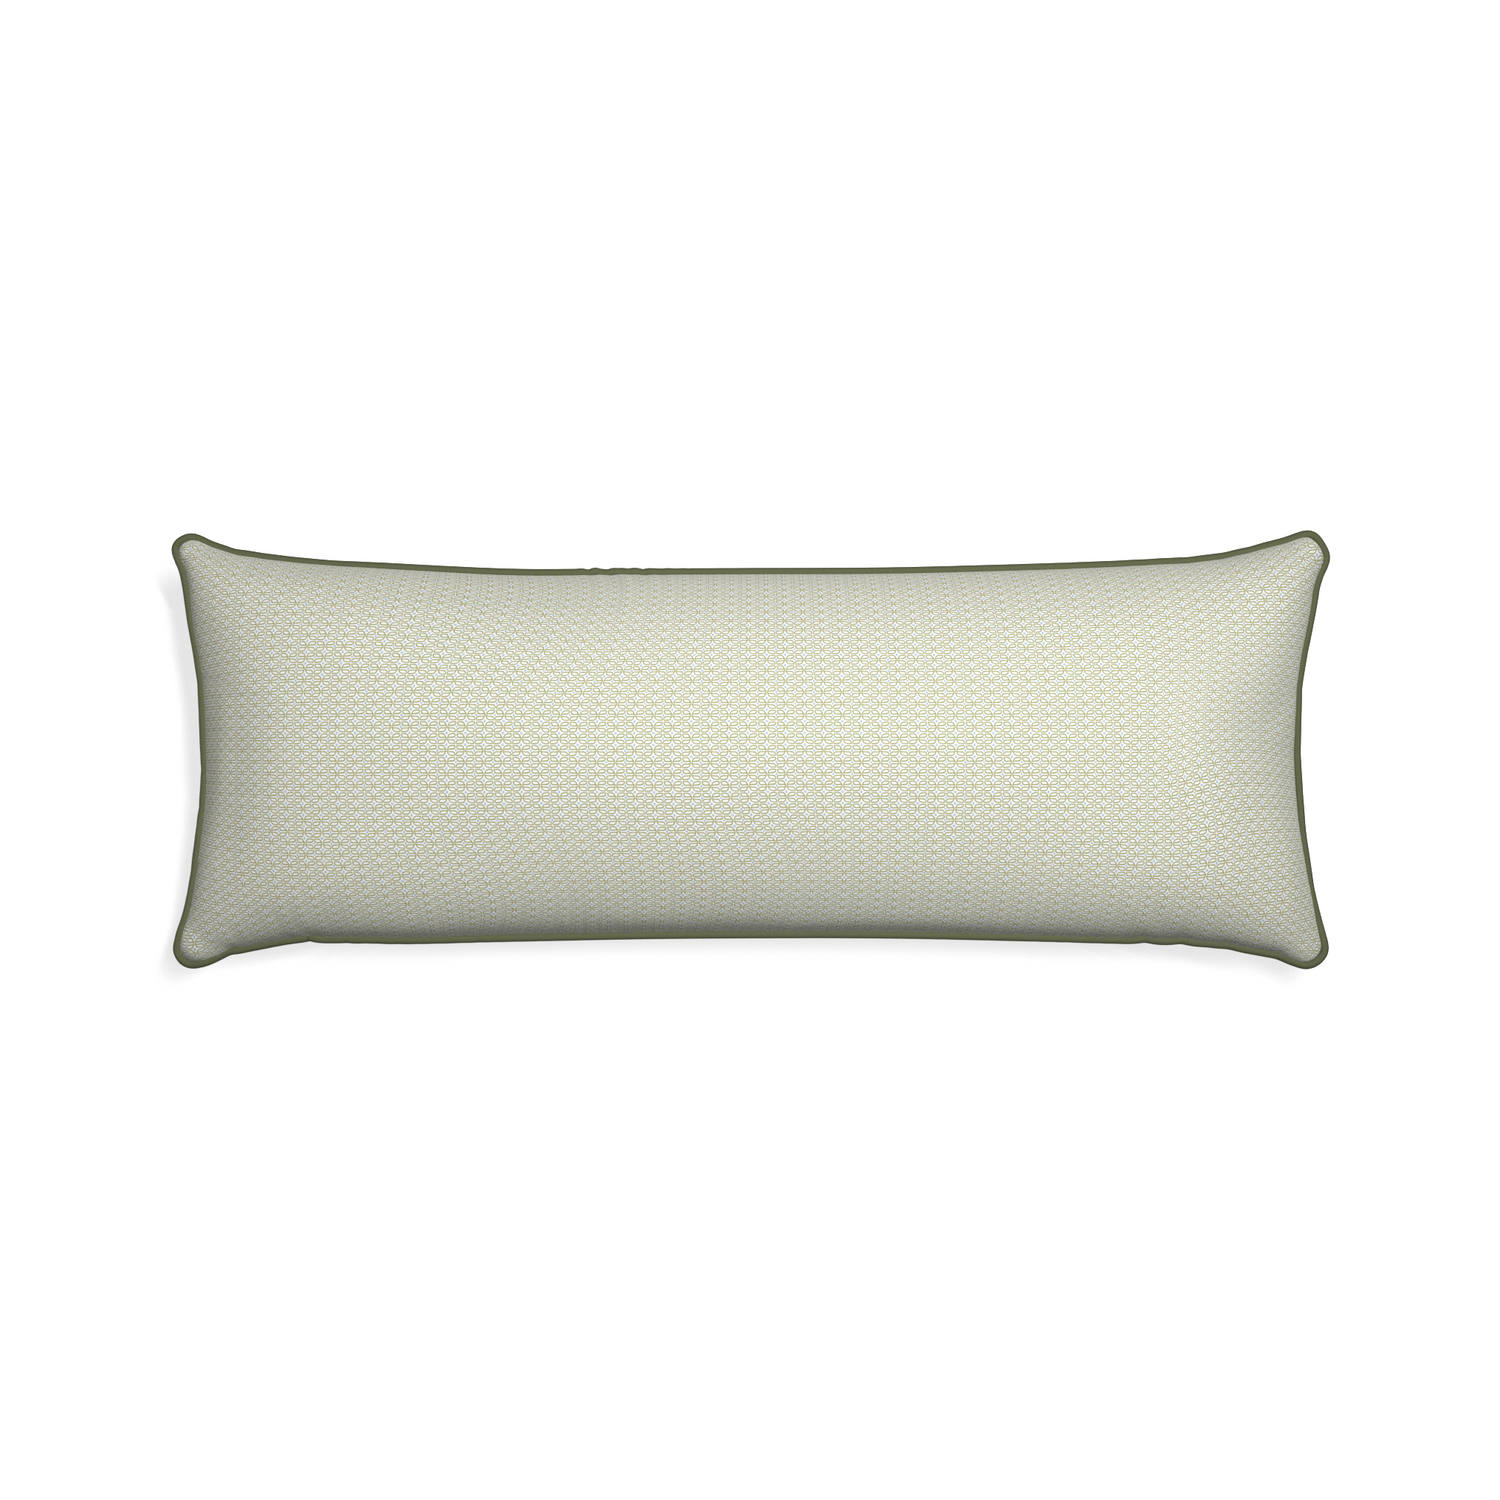 Xl-lumbar loomi moss custom moss green geometricpillow with f piping on white background